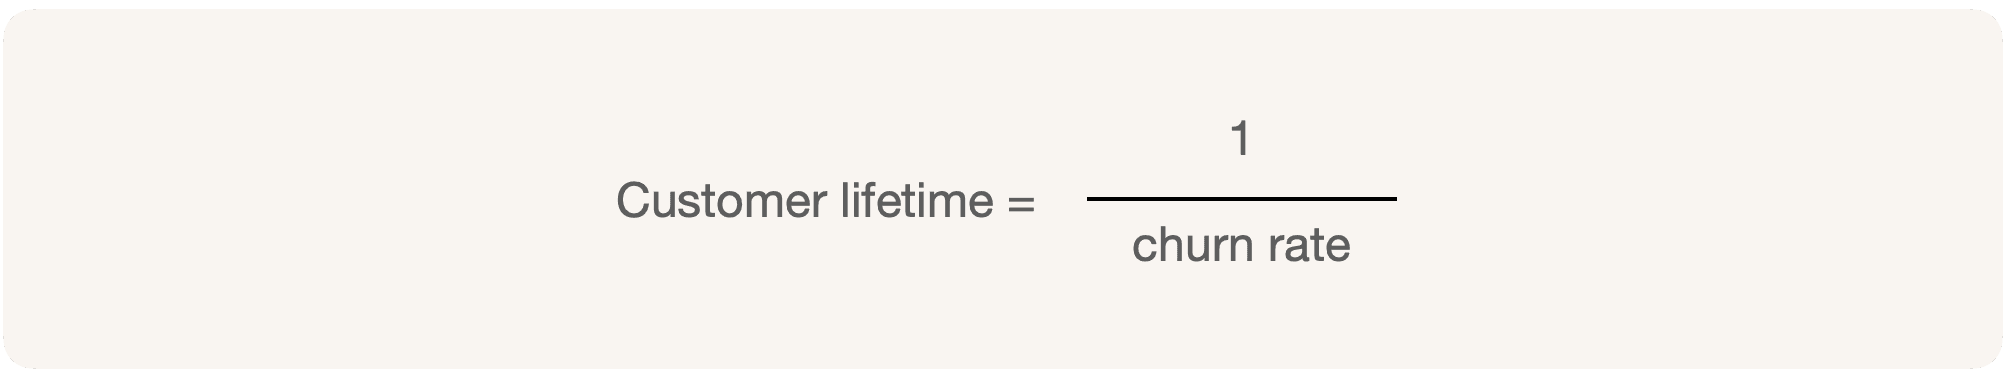 Simple Customer lifetime as reciprocal of churn rate